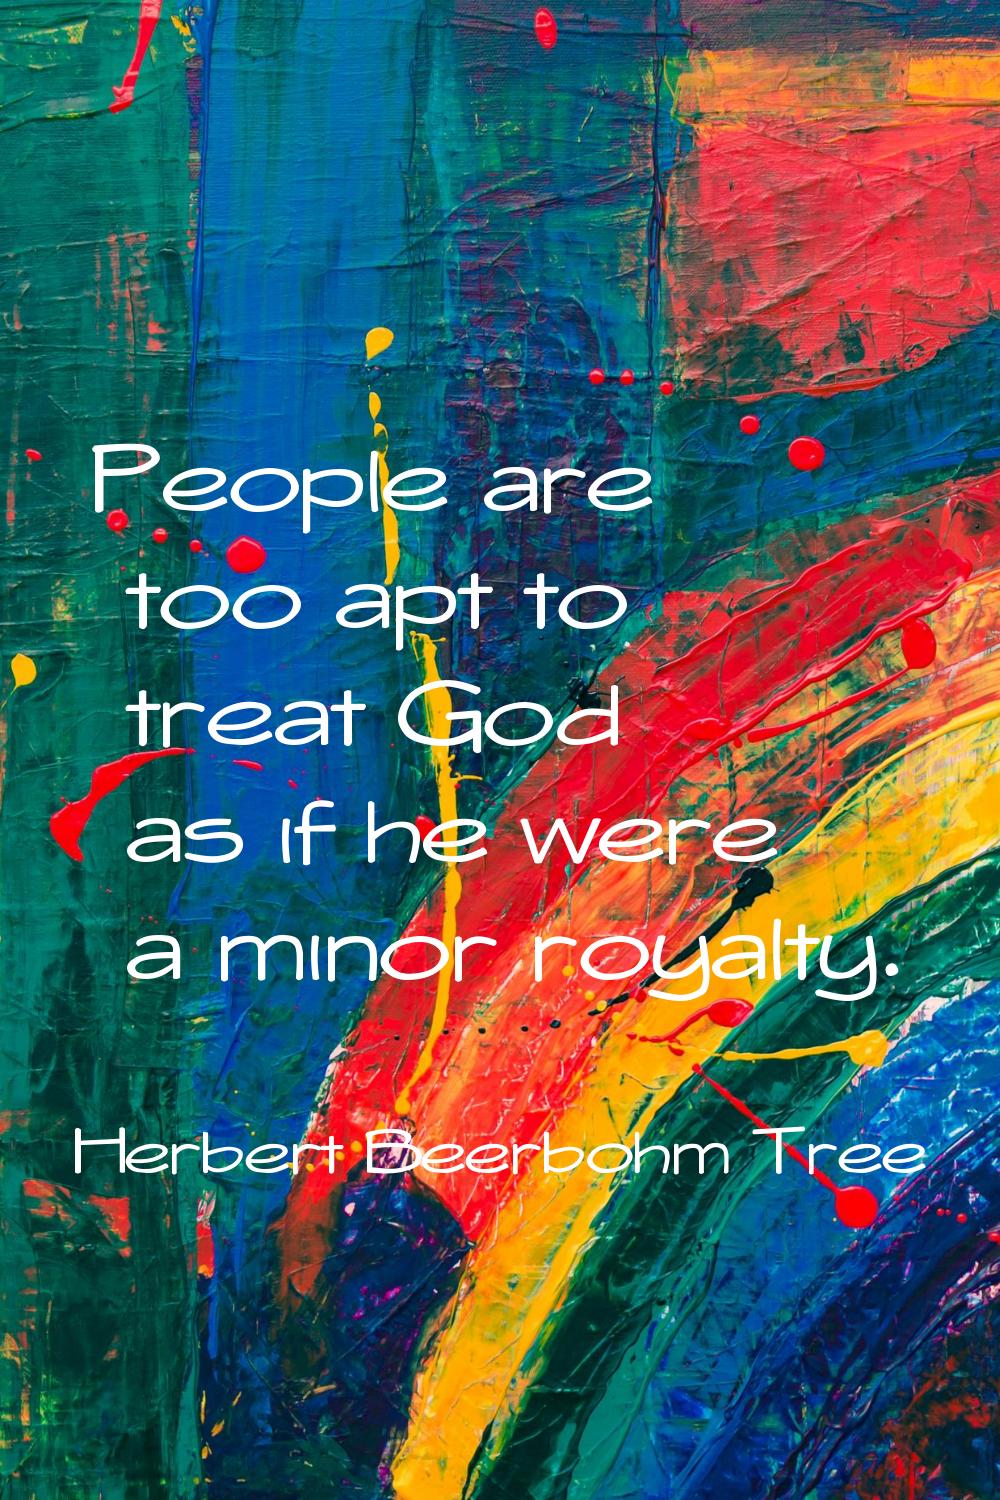 People are too apt to treat God as if he were a minor royalty.